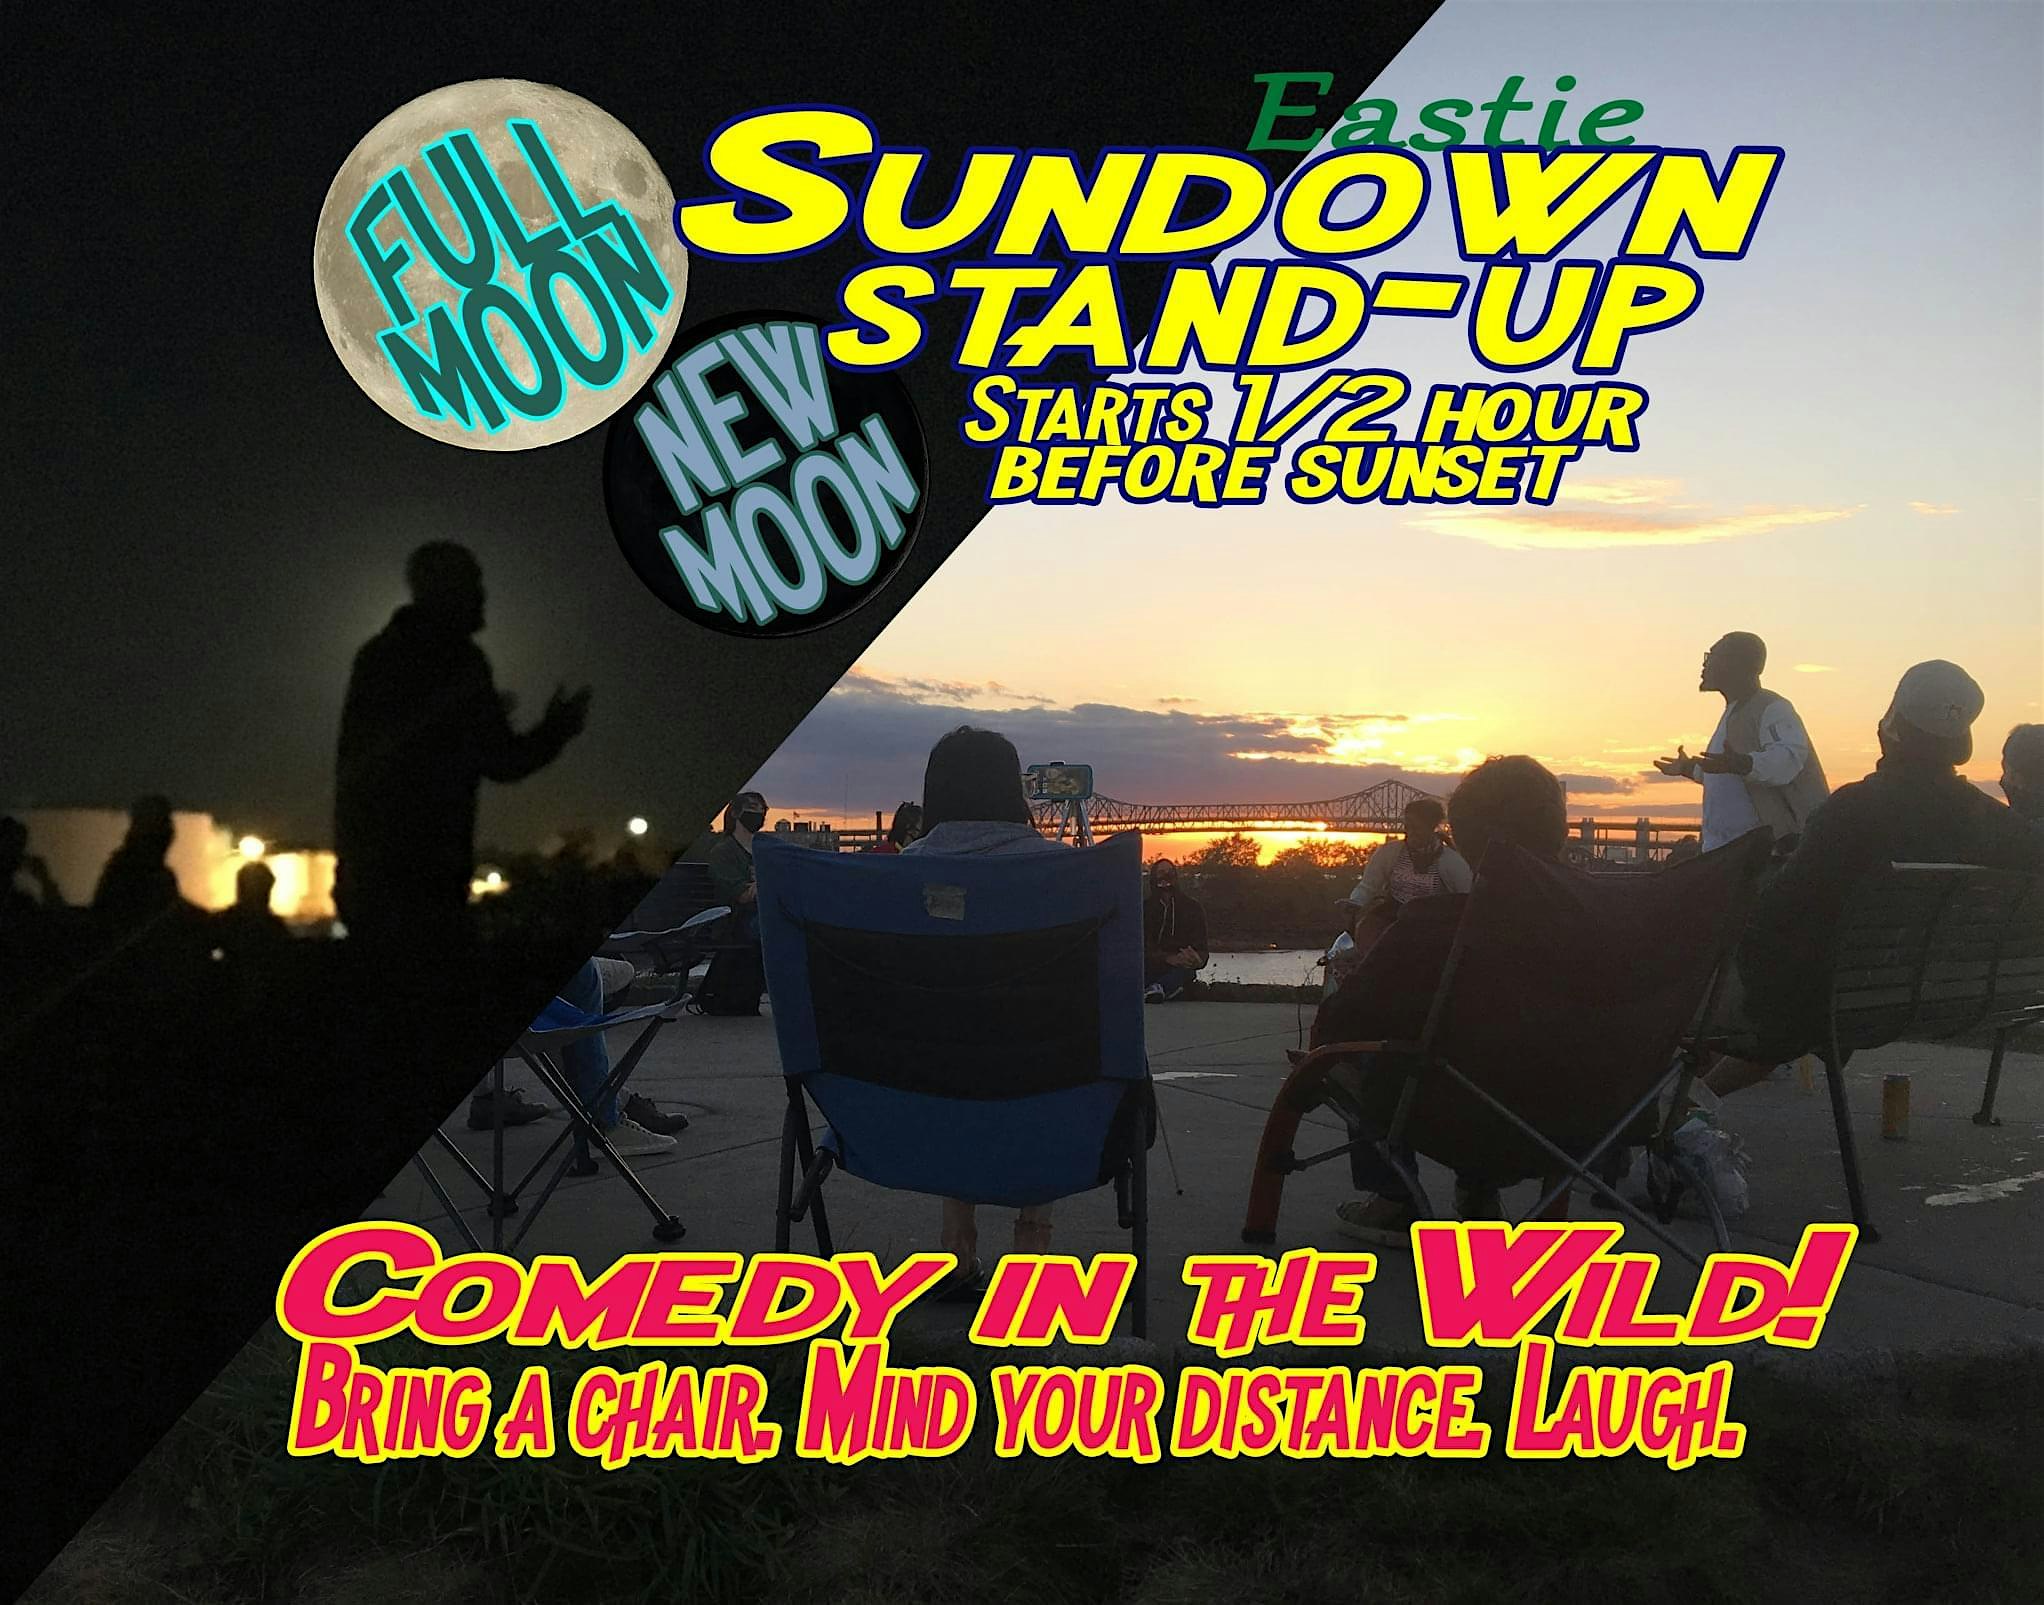 Sundown Stand-up: Full & New Moon Comedy in the Wild, Eastie